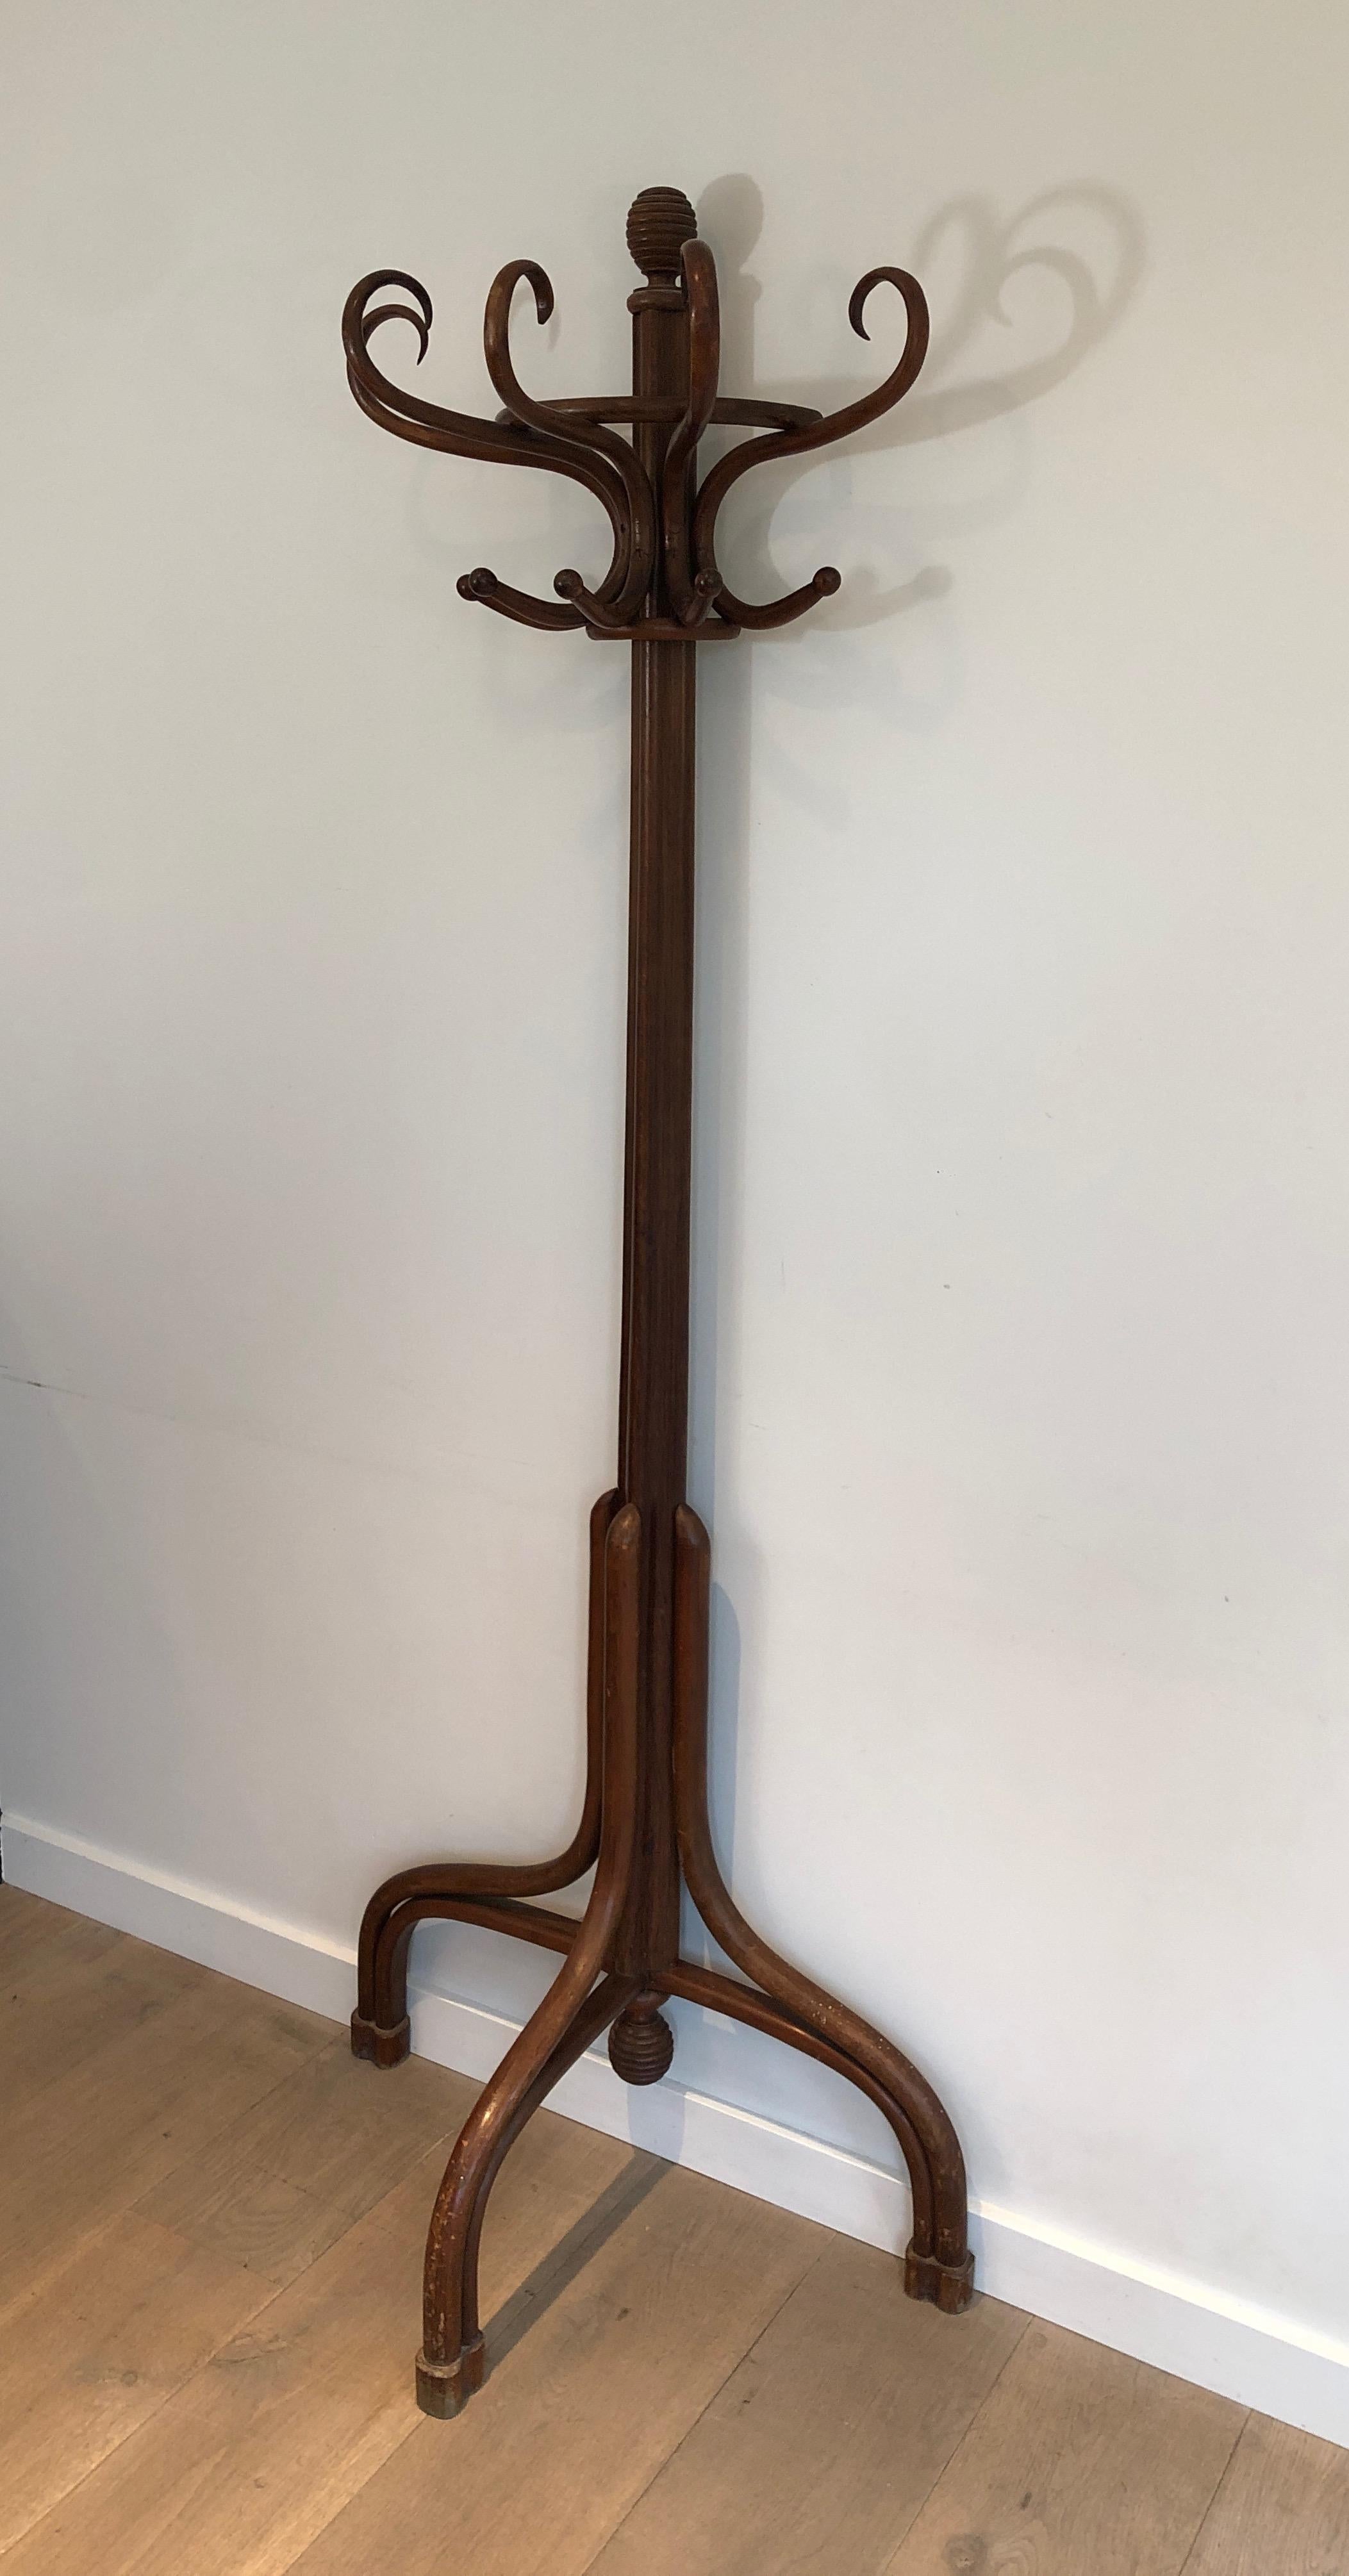 This very unusual half-moon parrot coat hanger is made of wood. This is a work in the style of famous Austrian designer Thonet. circa 1900.